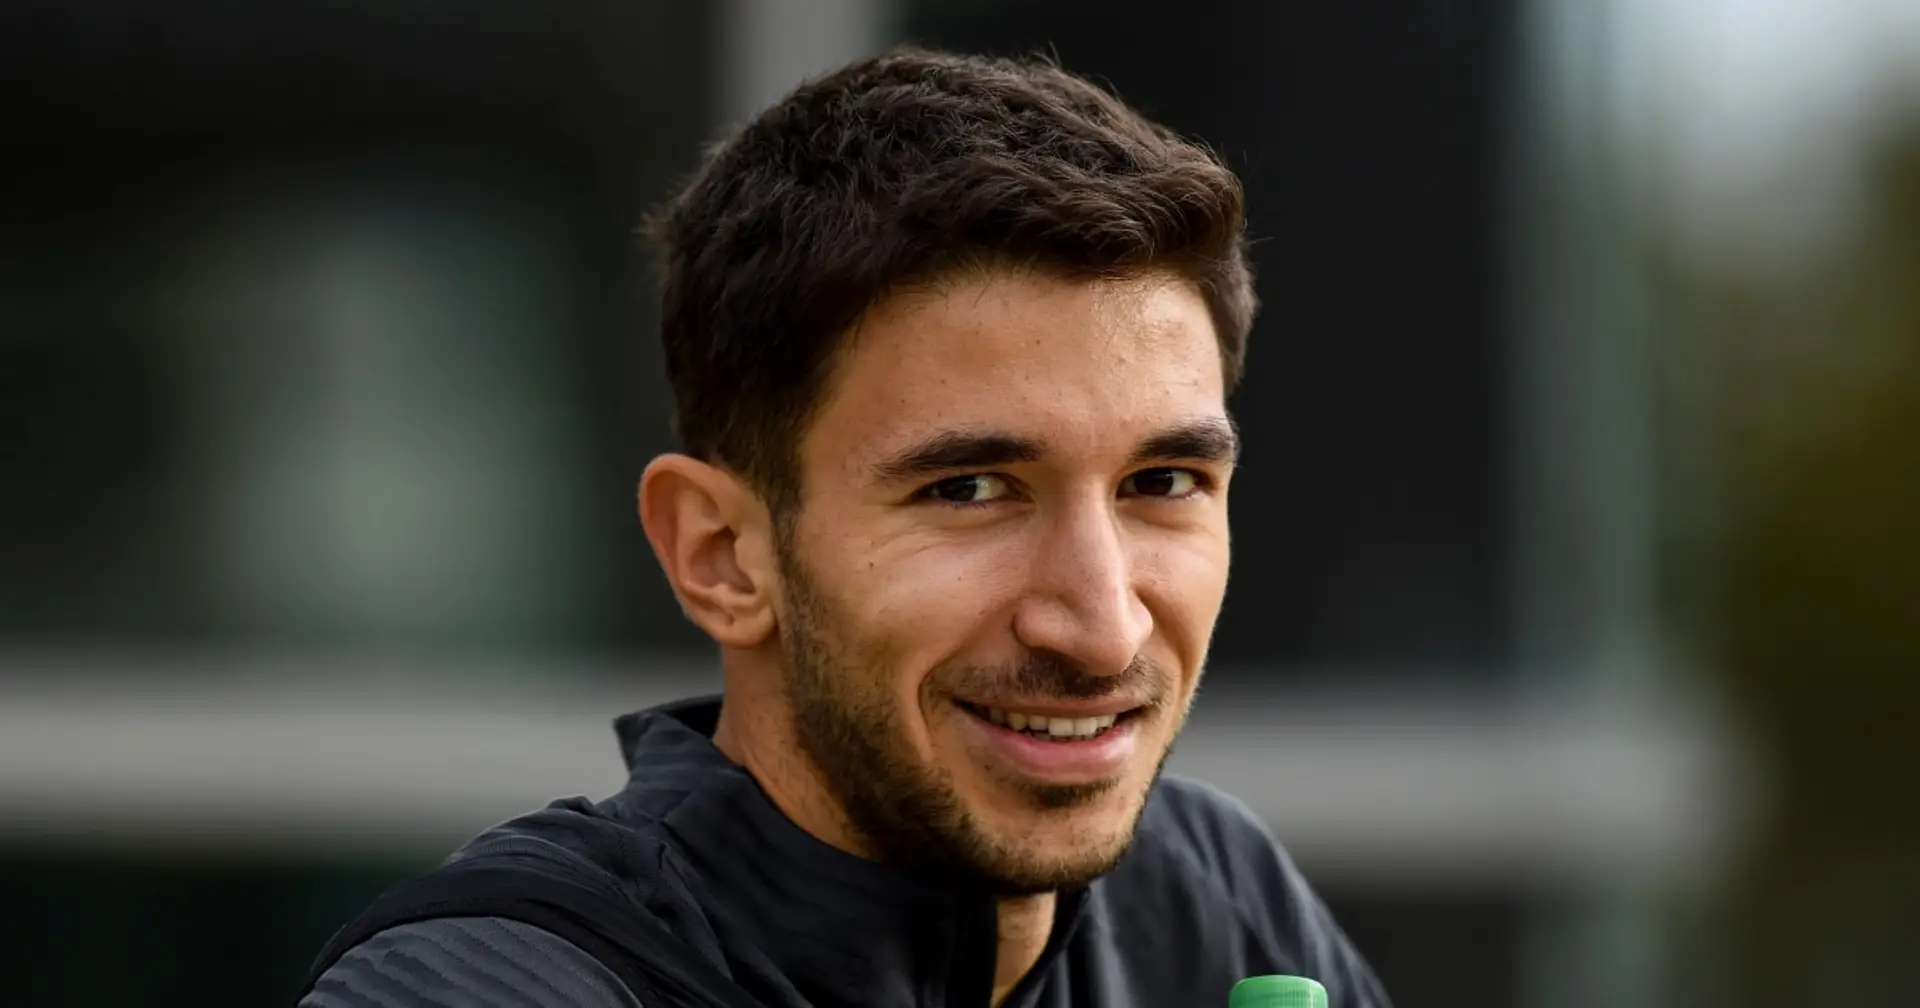 West Ham and So'ton weighing up loan moves for Marko Grujic (reliability: 4 stars)